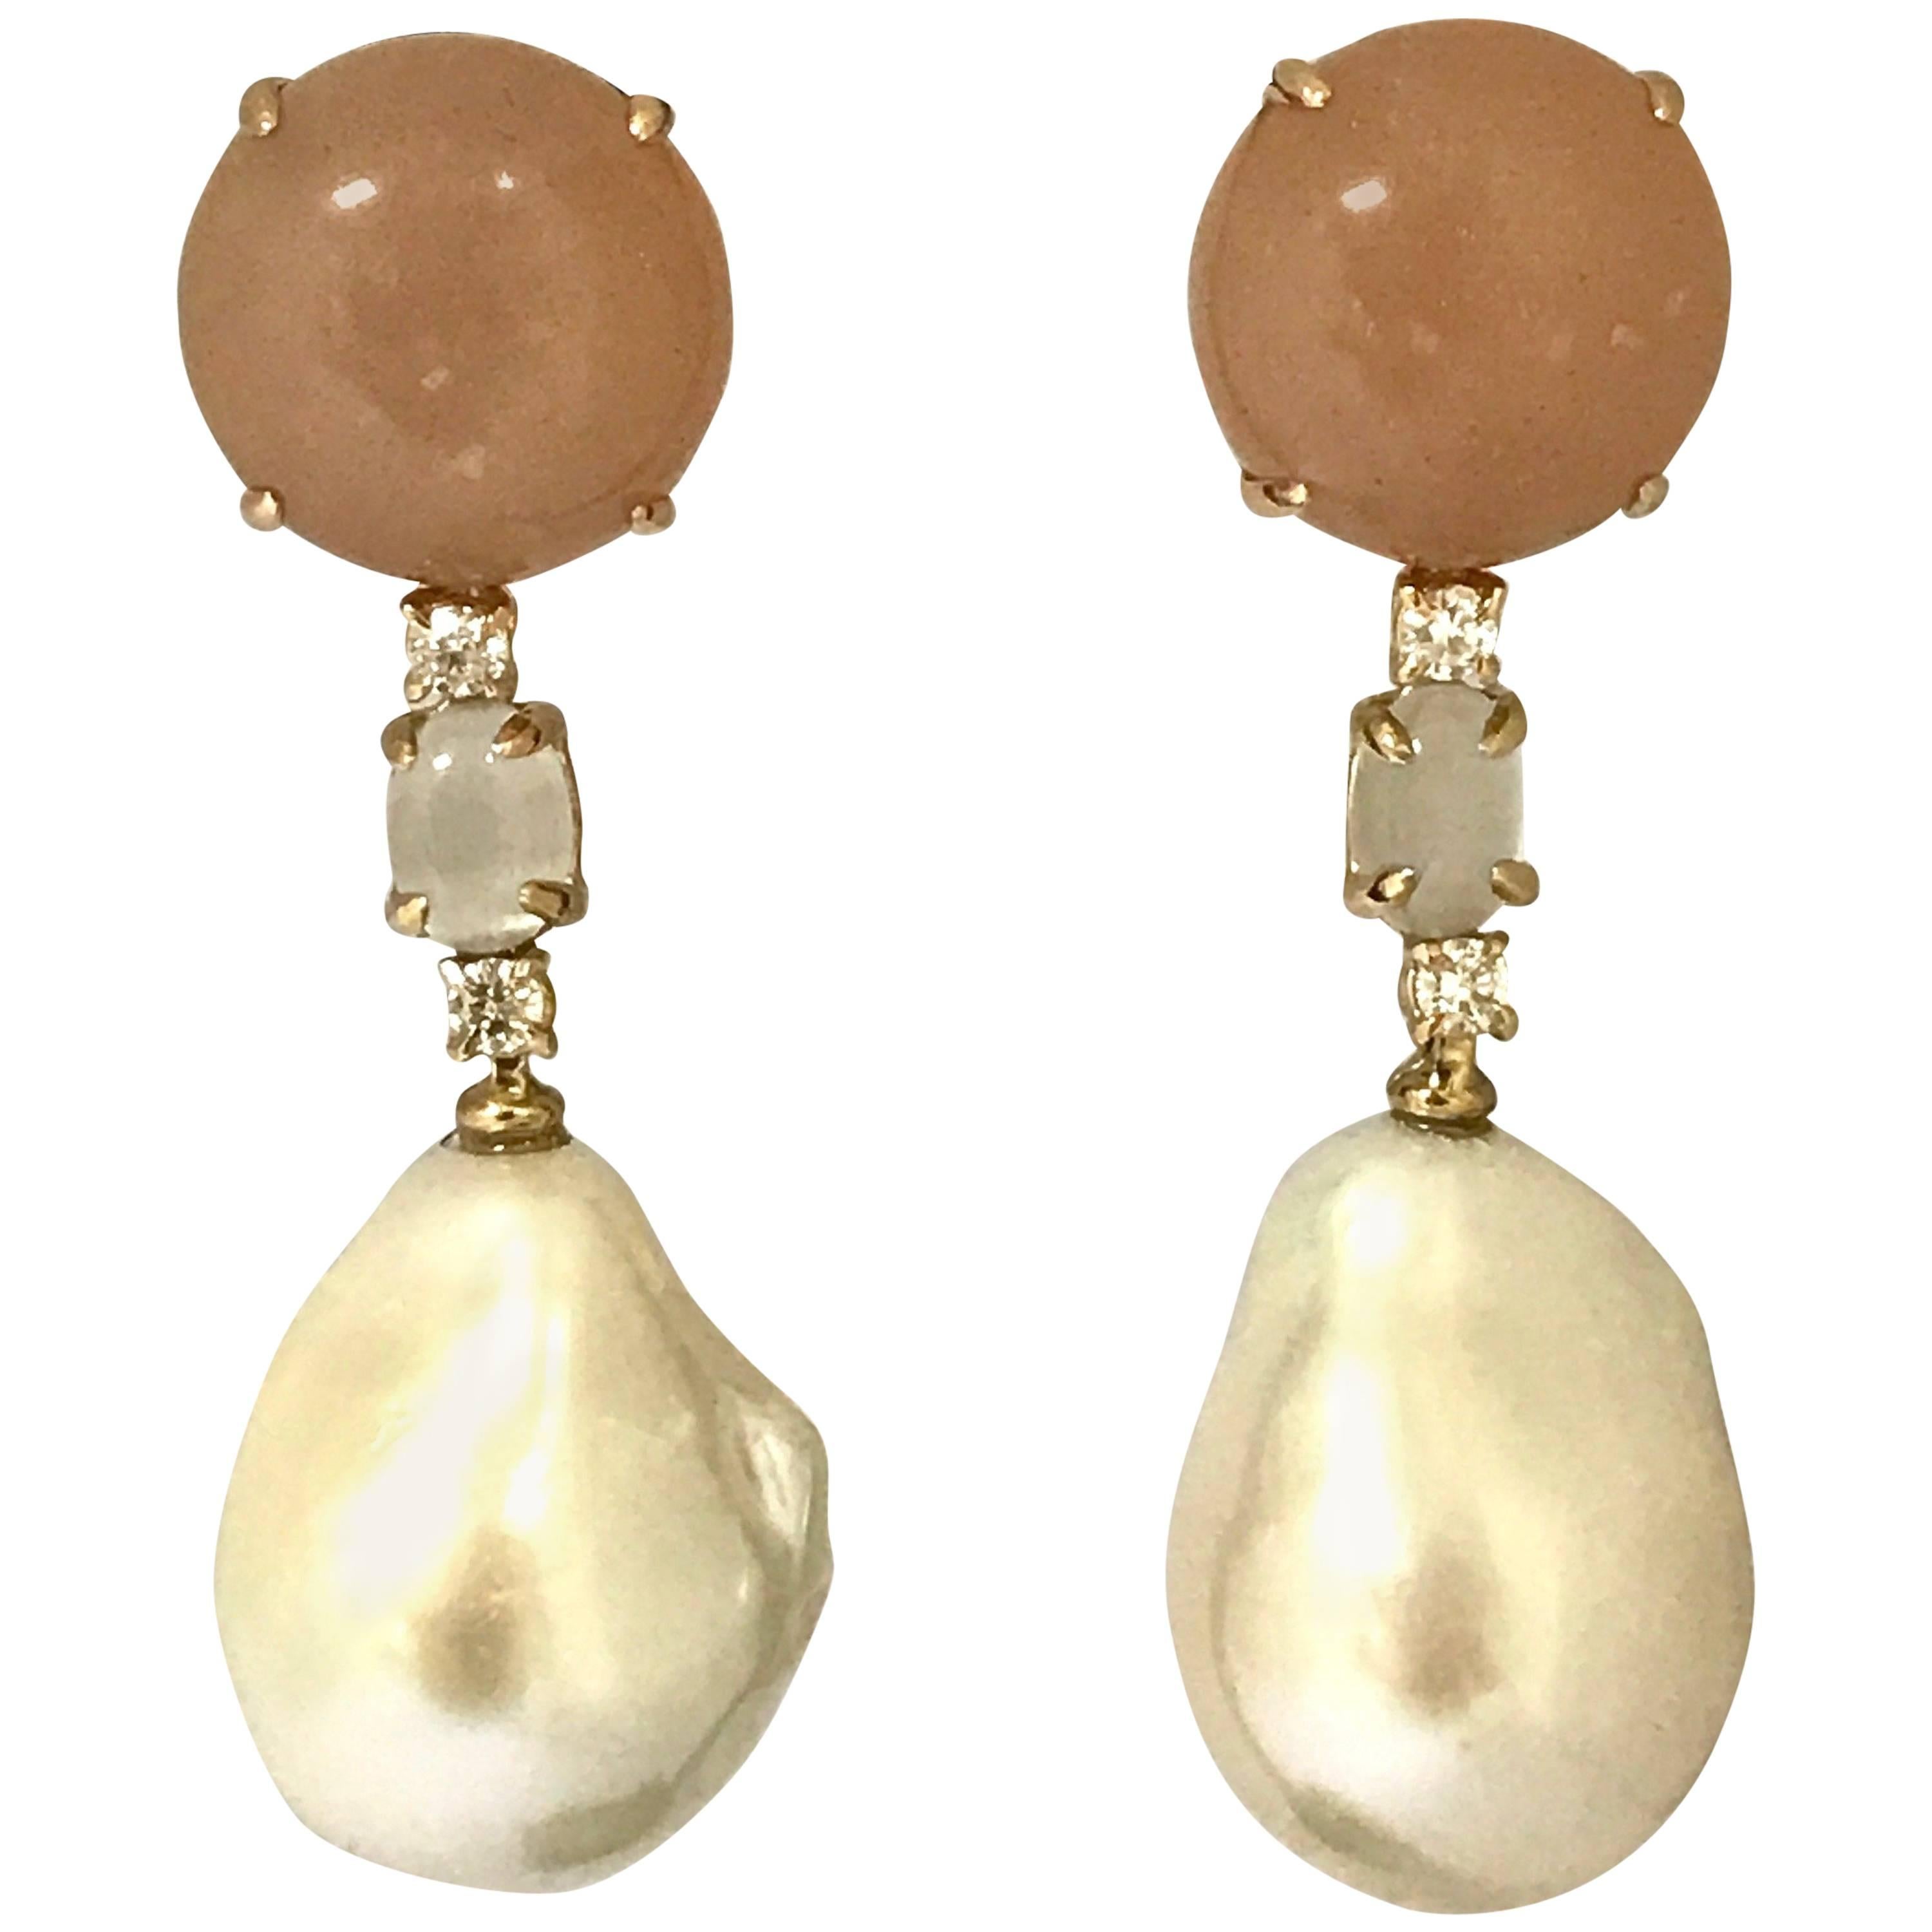 These elegant earrings in 18-carat yellow gold are adorned with sparkling diamonds and cultured pearls, creating a harmonious balance between timeless luxury and natural beauty.

The diamonds, totaling 0.28 carats, add a subtle sparkle to these